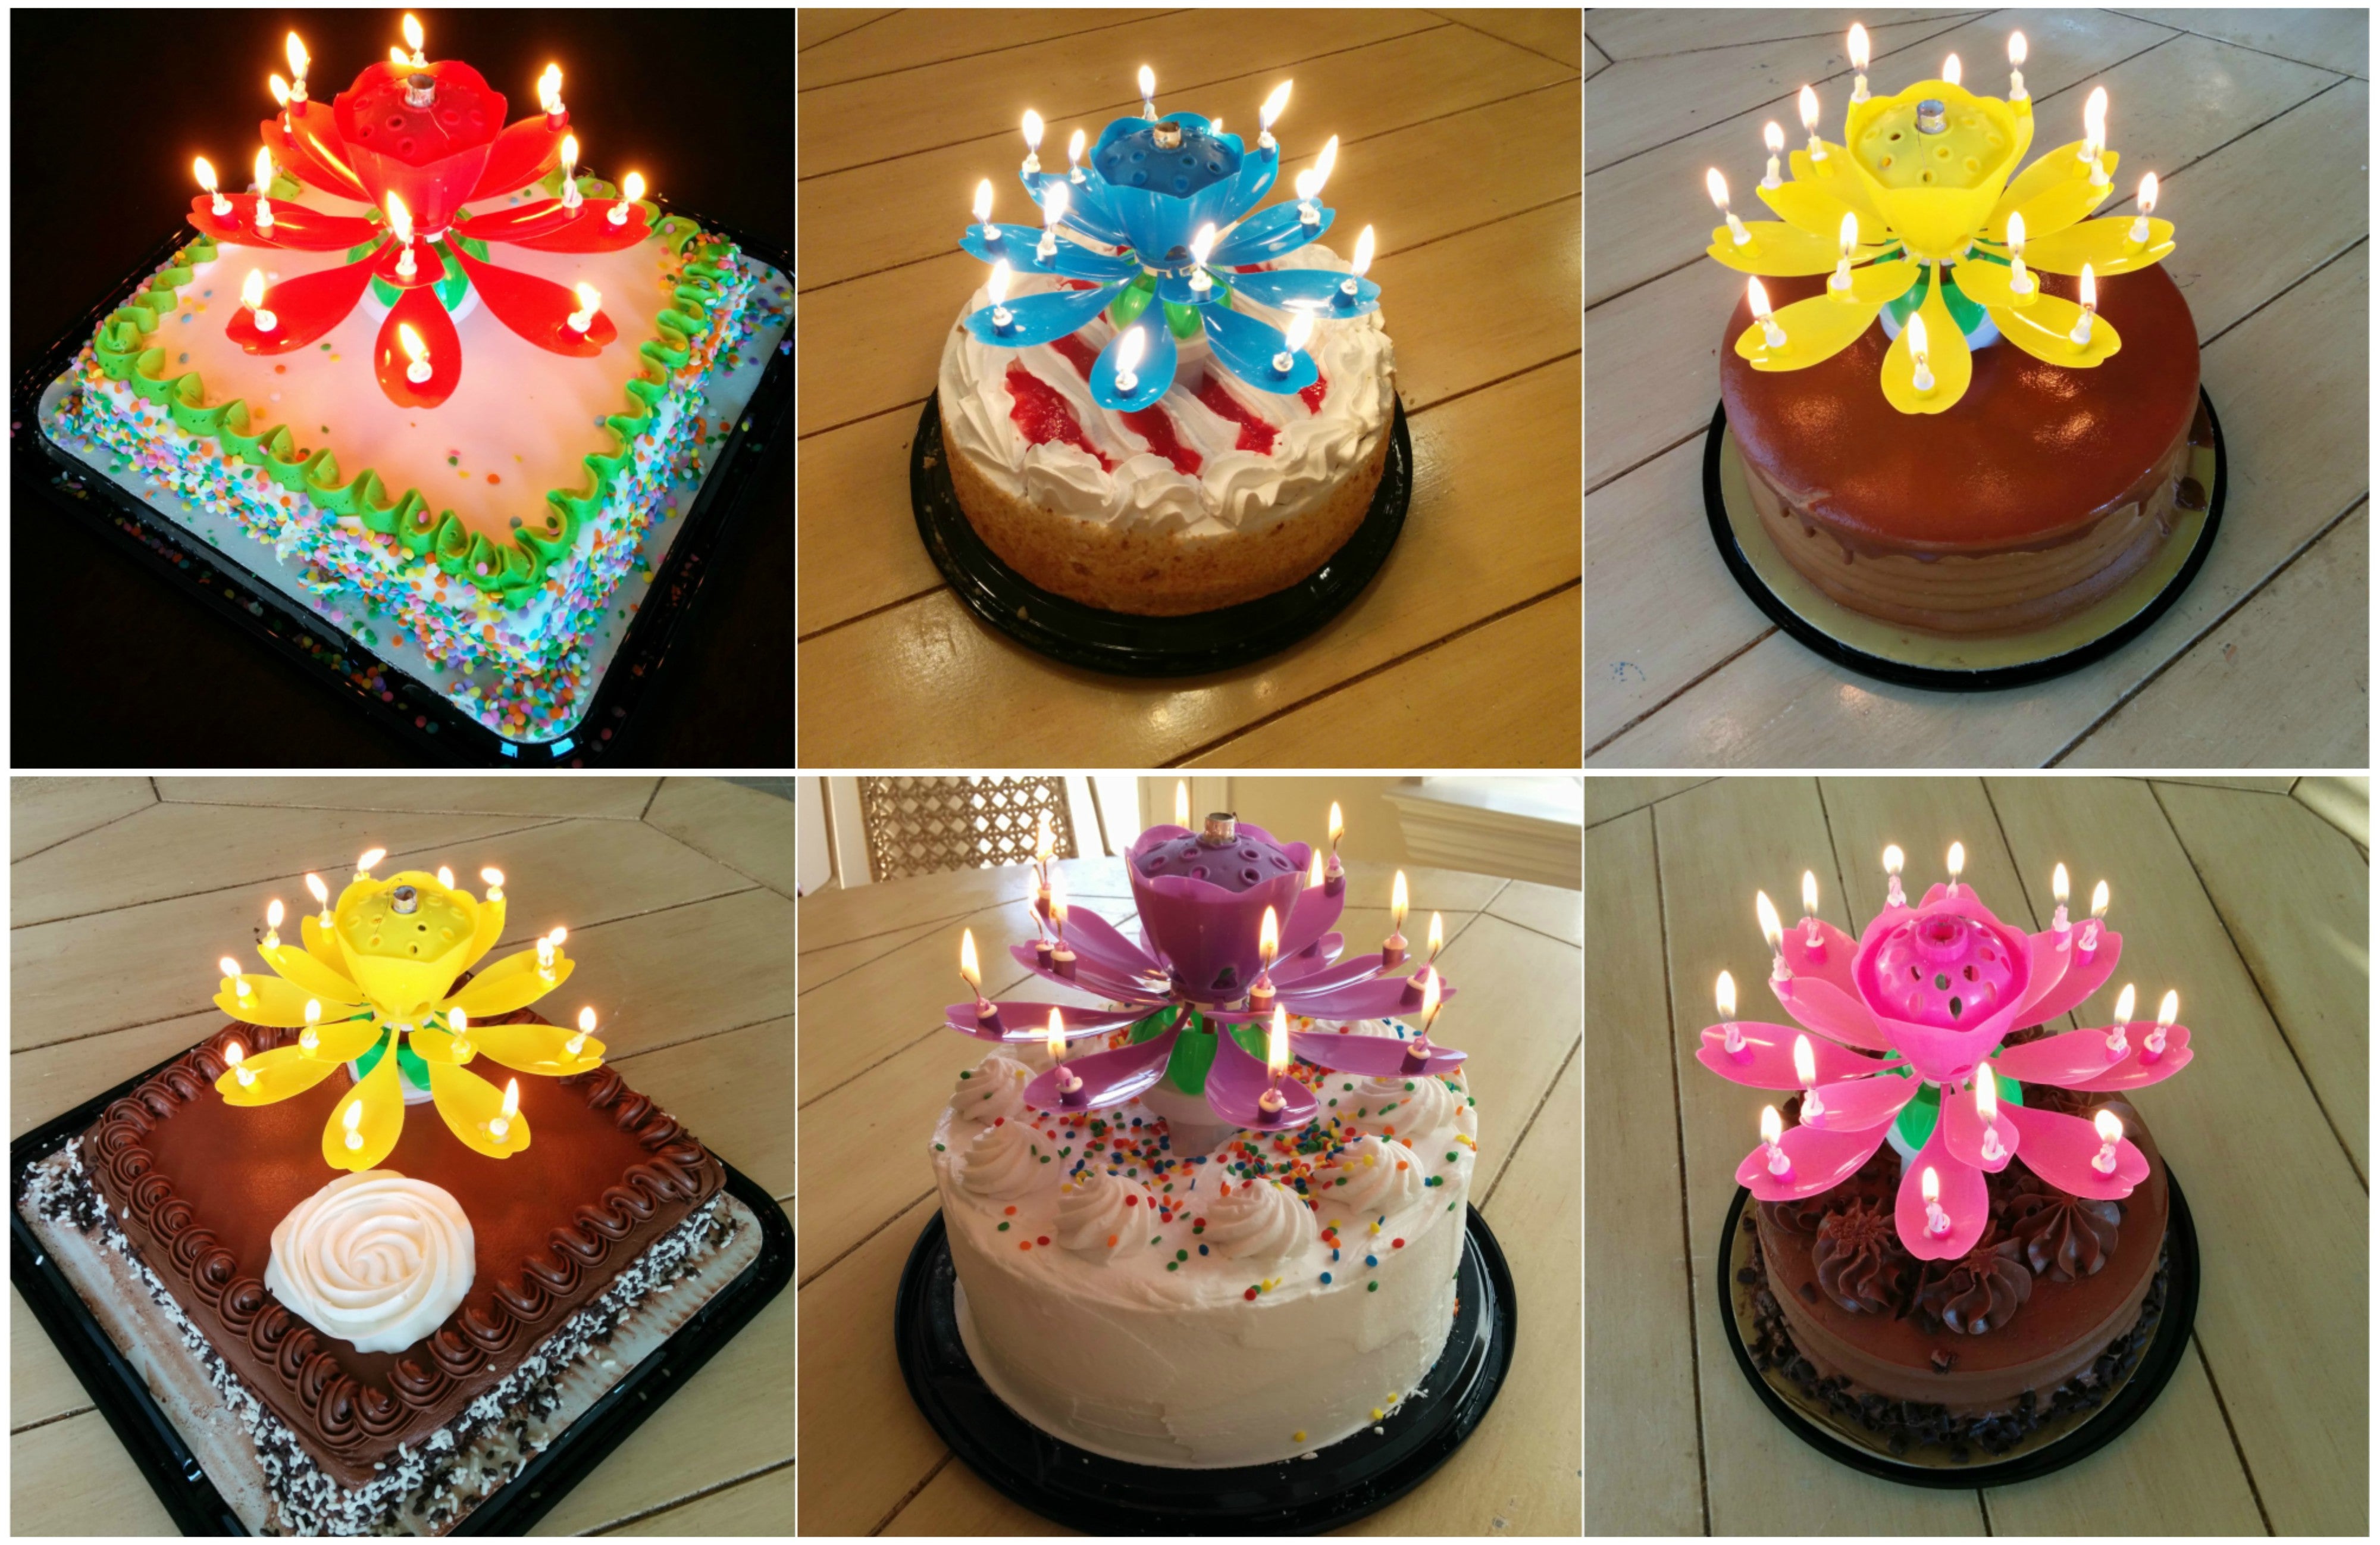 Lotus Candles - The Original Rotating Singing Blooming Birthday Candles! As Seen on TV and everywhere else since 2011.